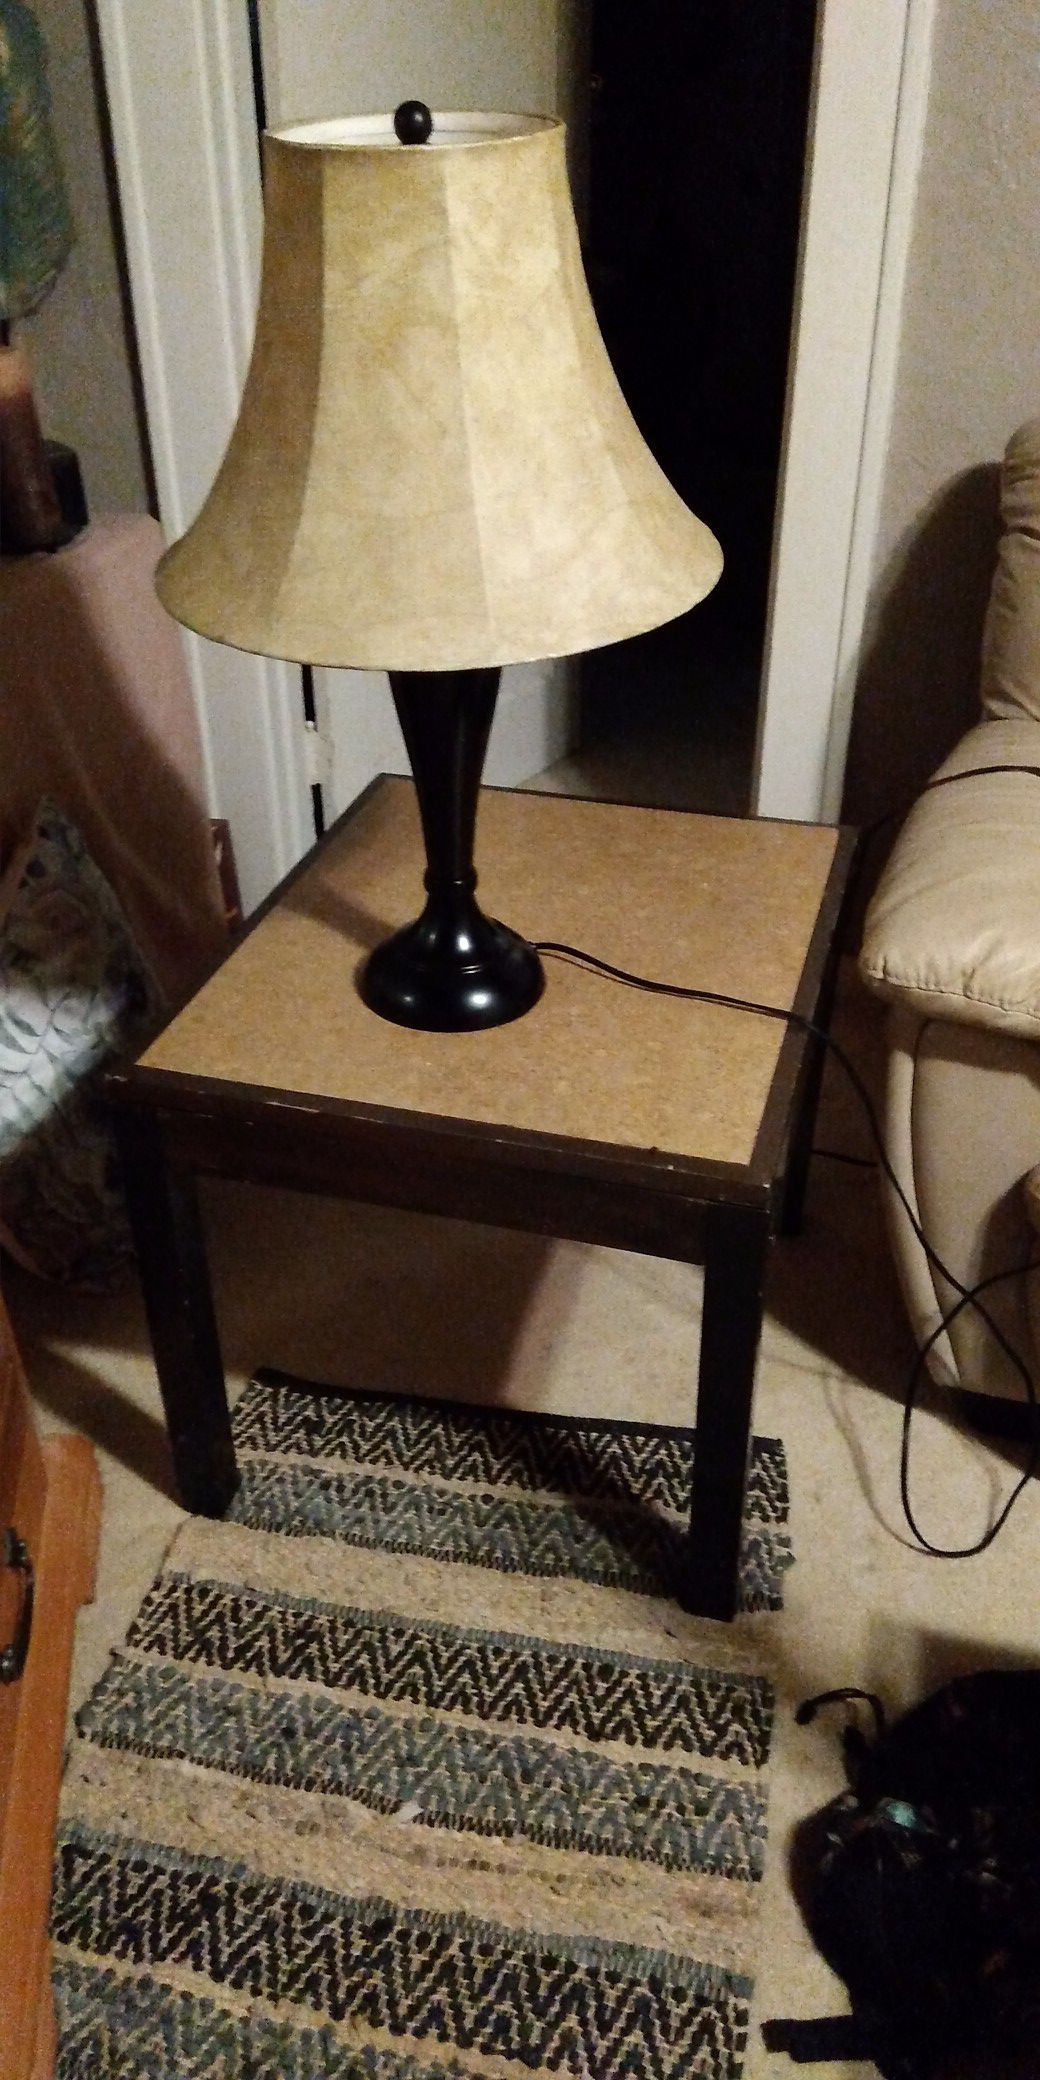 Matching lamp and side/end table.